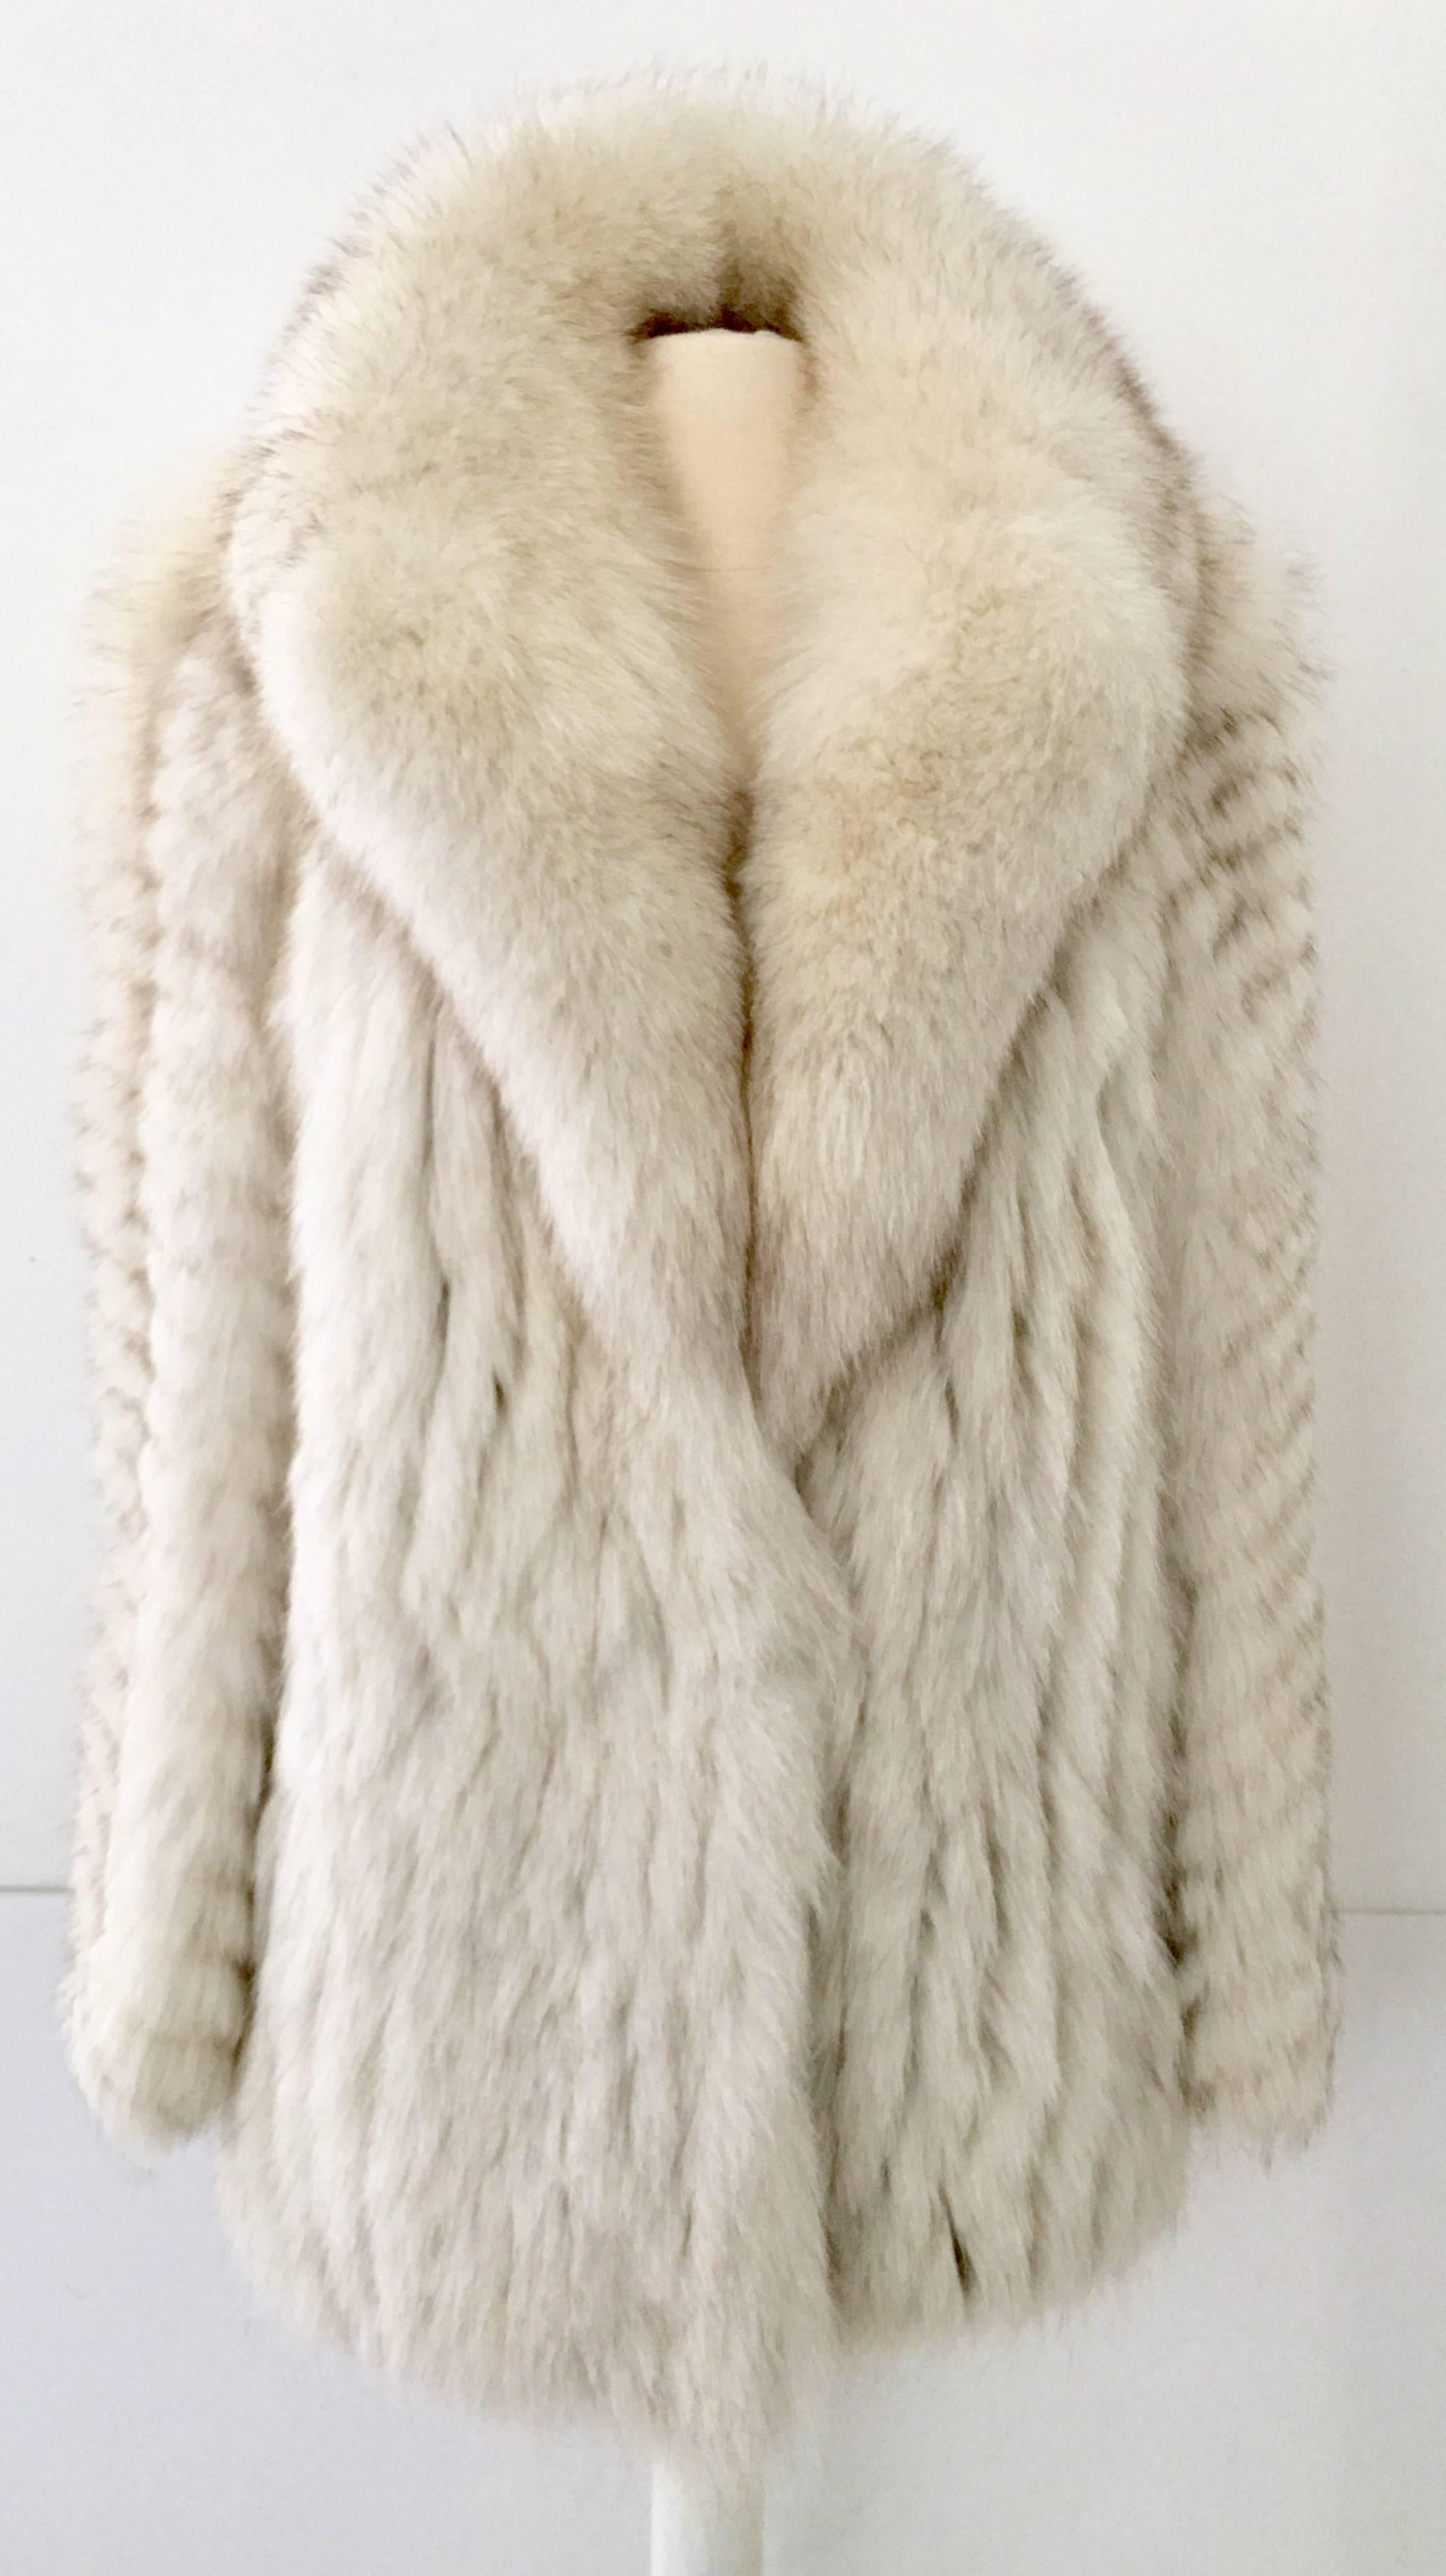 Vintage Super Soft & Luxurious fluffy winter white brown tip fox fur jacket. Features a generous single breasted collar. There are two front side pockets.
Fully lined with silver satin, one invisible toggle close located at center chest.
Fits